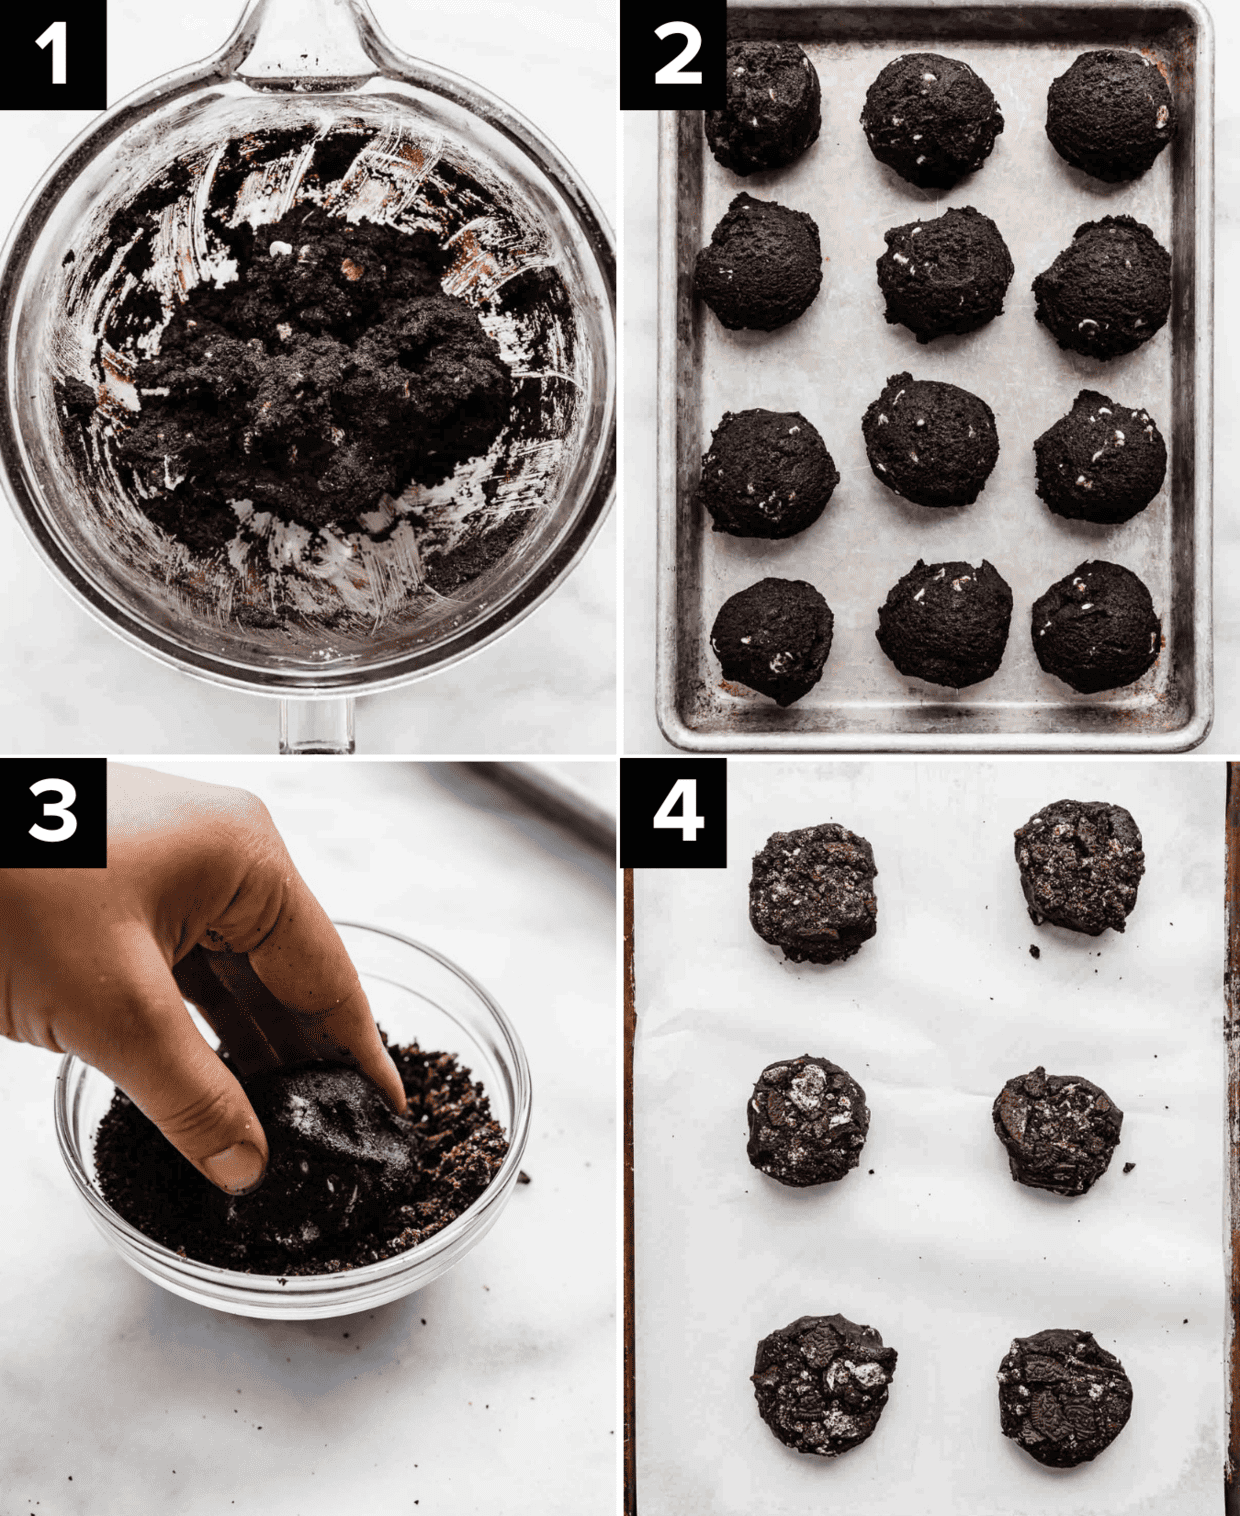 Four images showing how to make Crumbl Chocolate Cookies and Cream Cookies using black cocoa powder, white chocolate chips, and Oreo's.